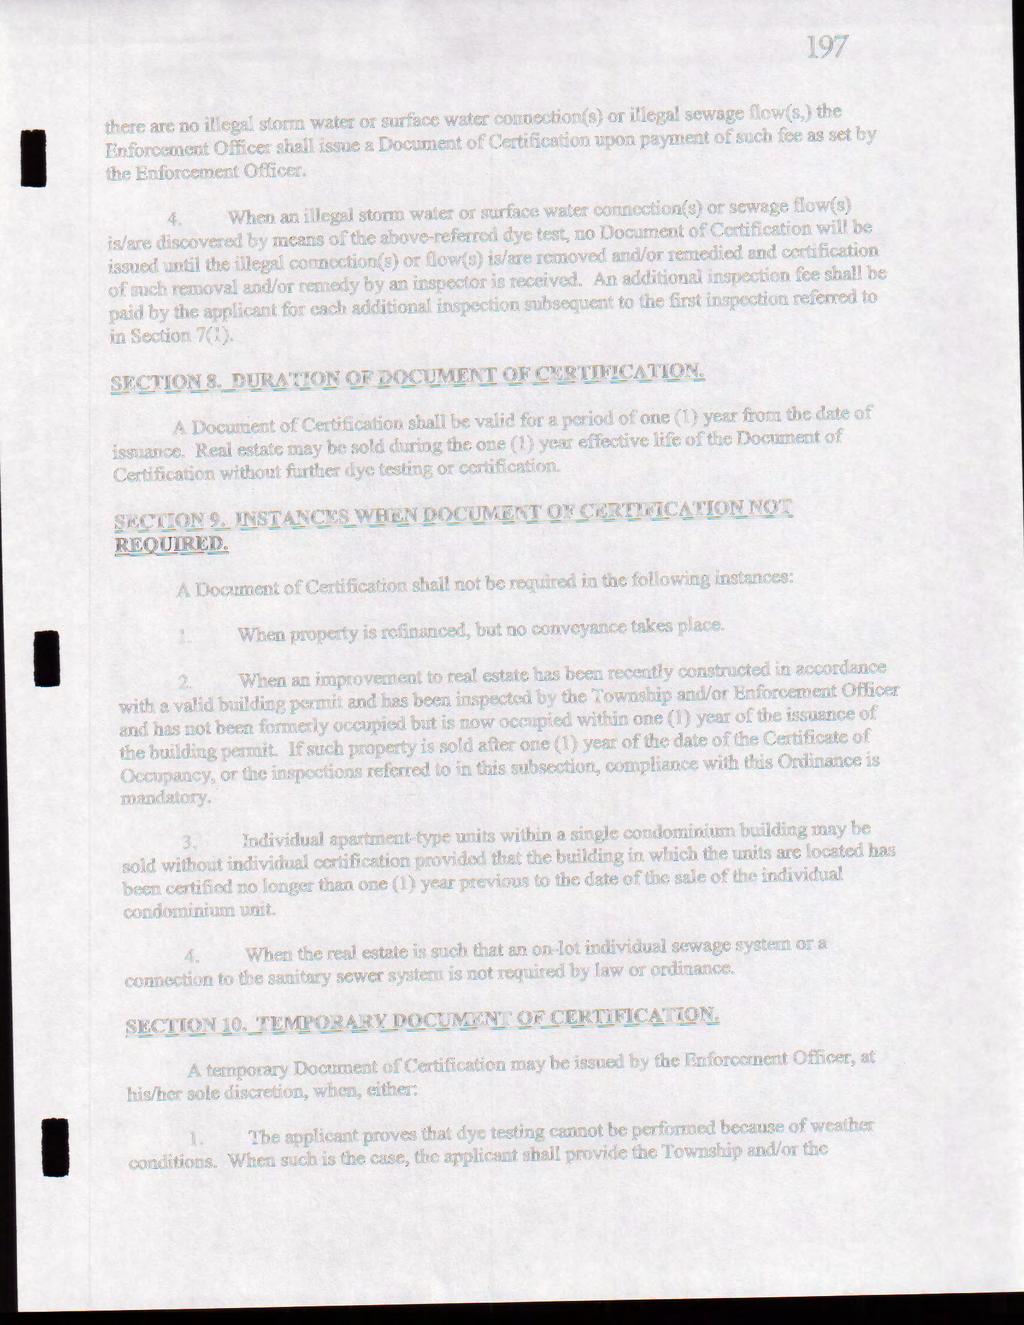 197 there are no illegal storm water or surface water connection(s) or illegal sewage flow(s,) the Enforcement Officer shall issue a Document of Certification upon payment of such fee as set by the